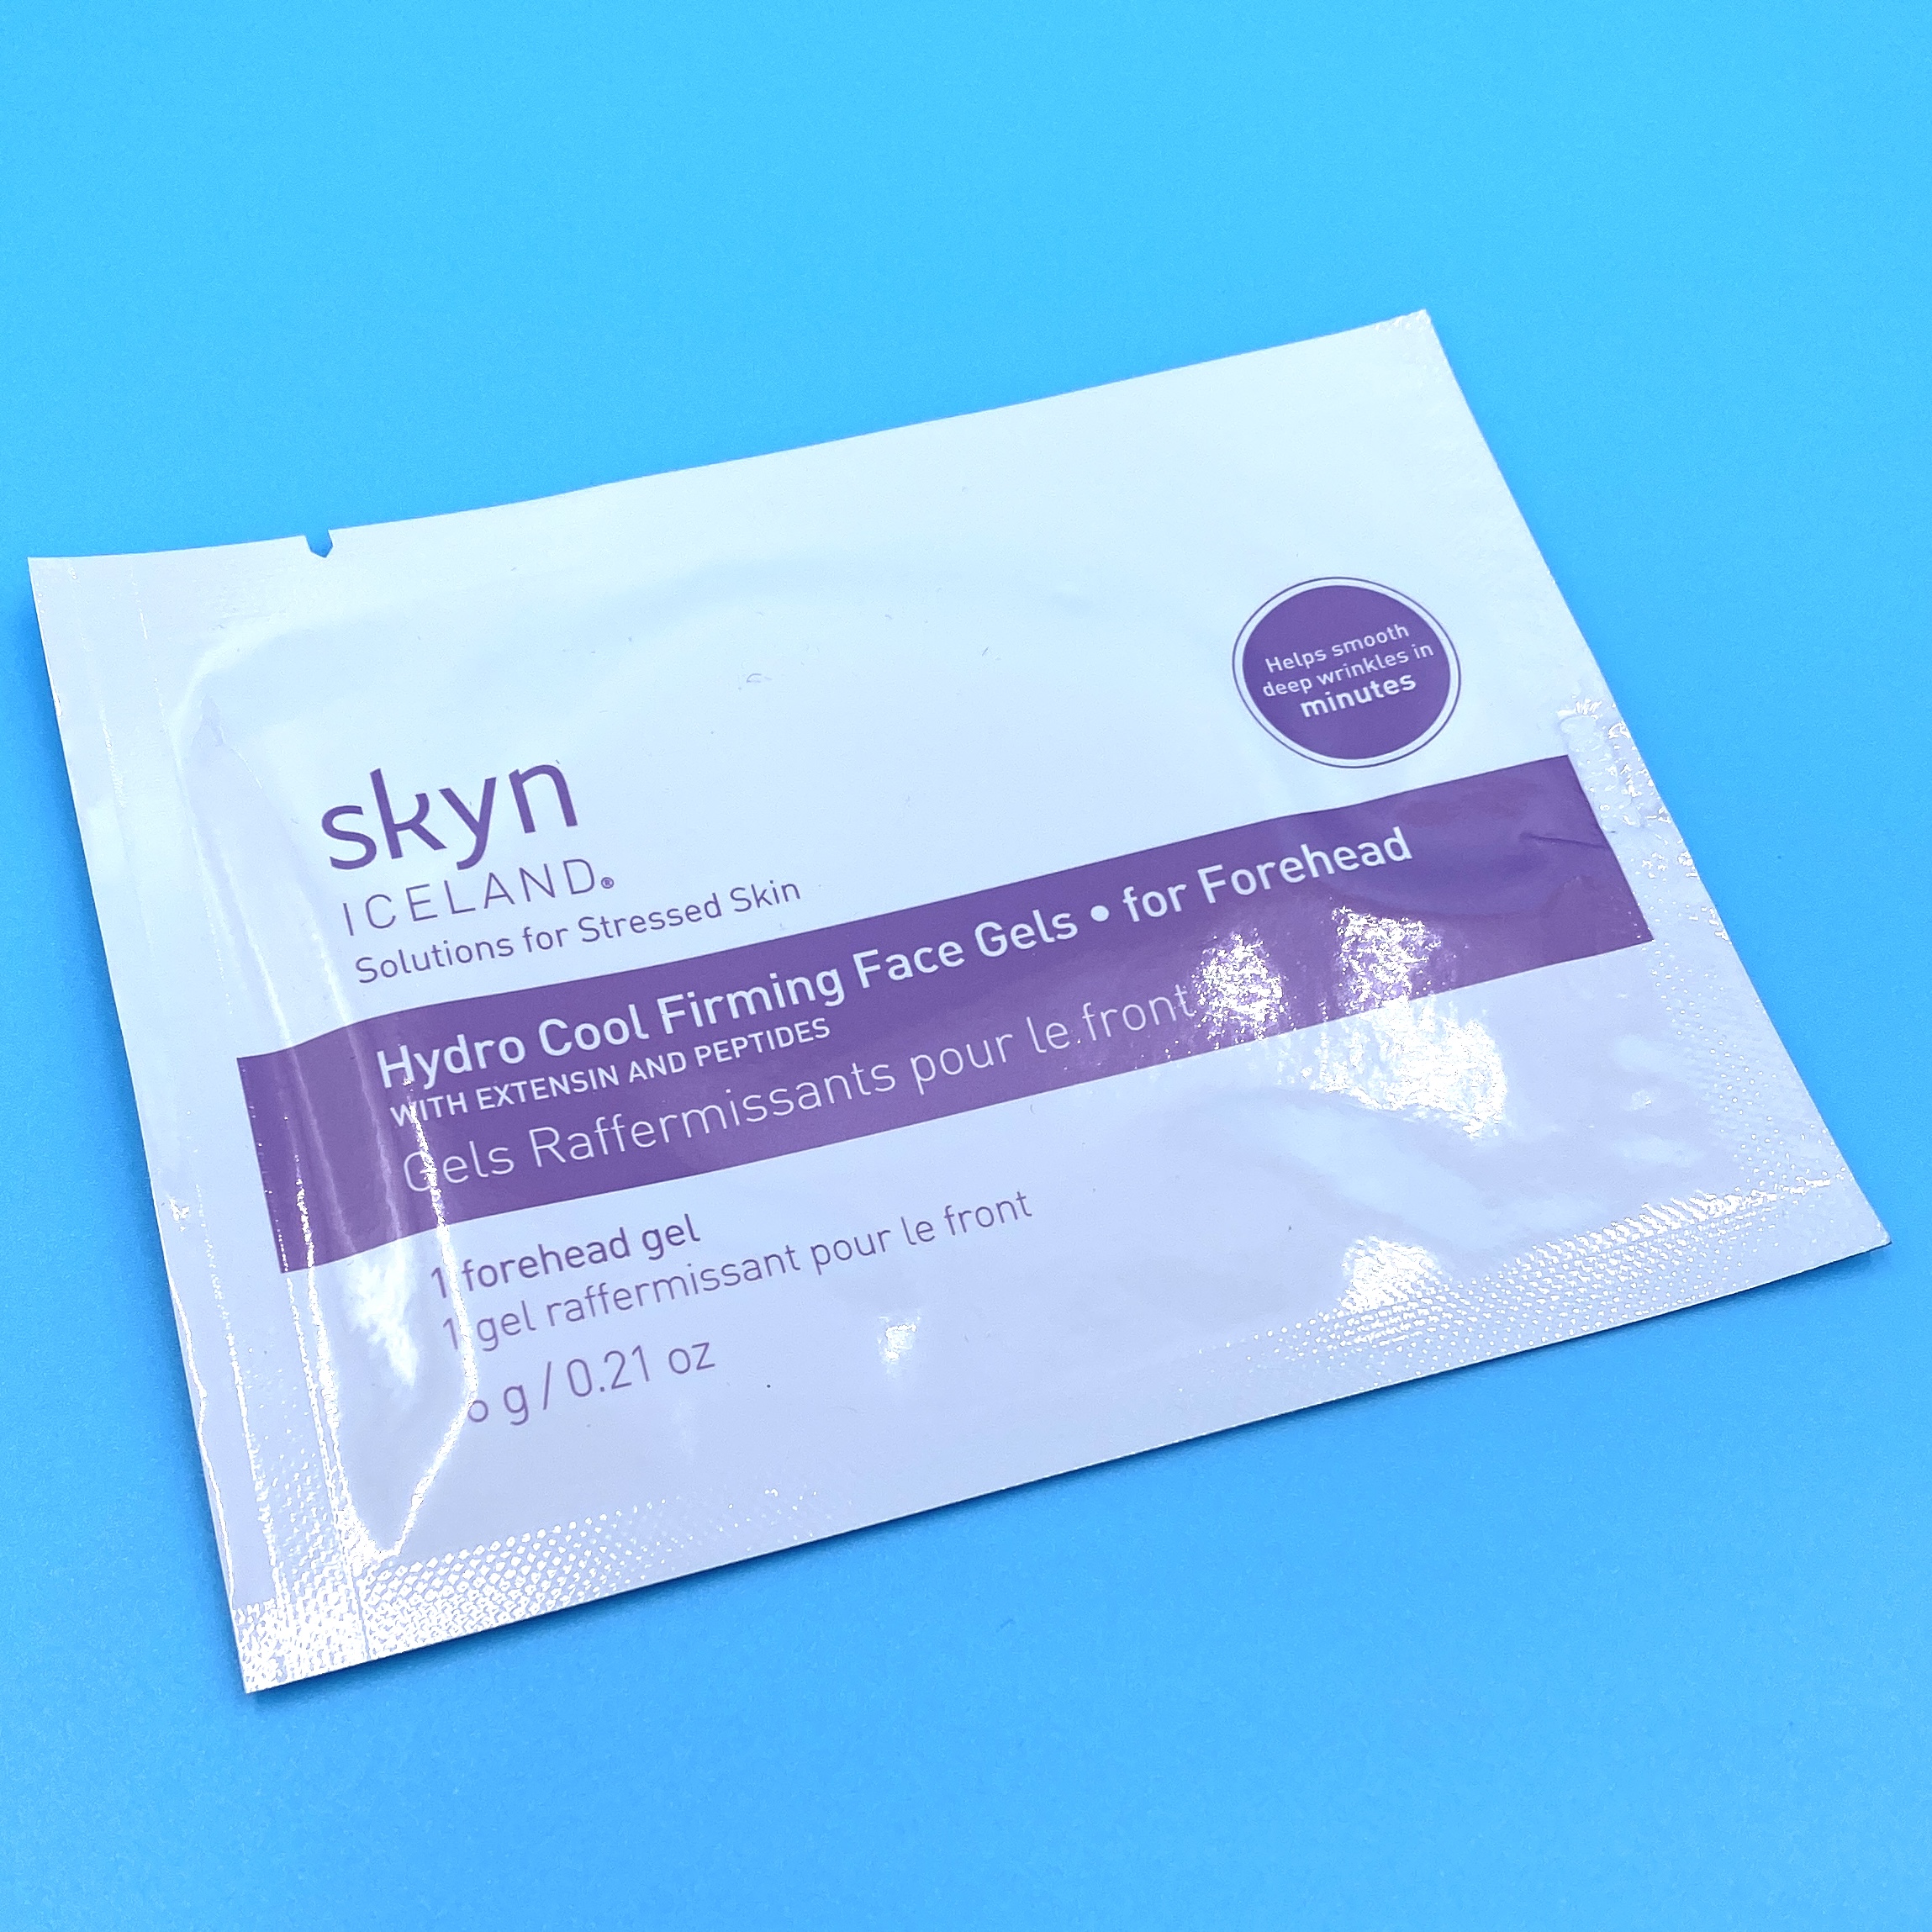 Skyn Iceland Hydro Cool Firming Face Gels - For Forehead Front for Birchbox October 2020